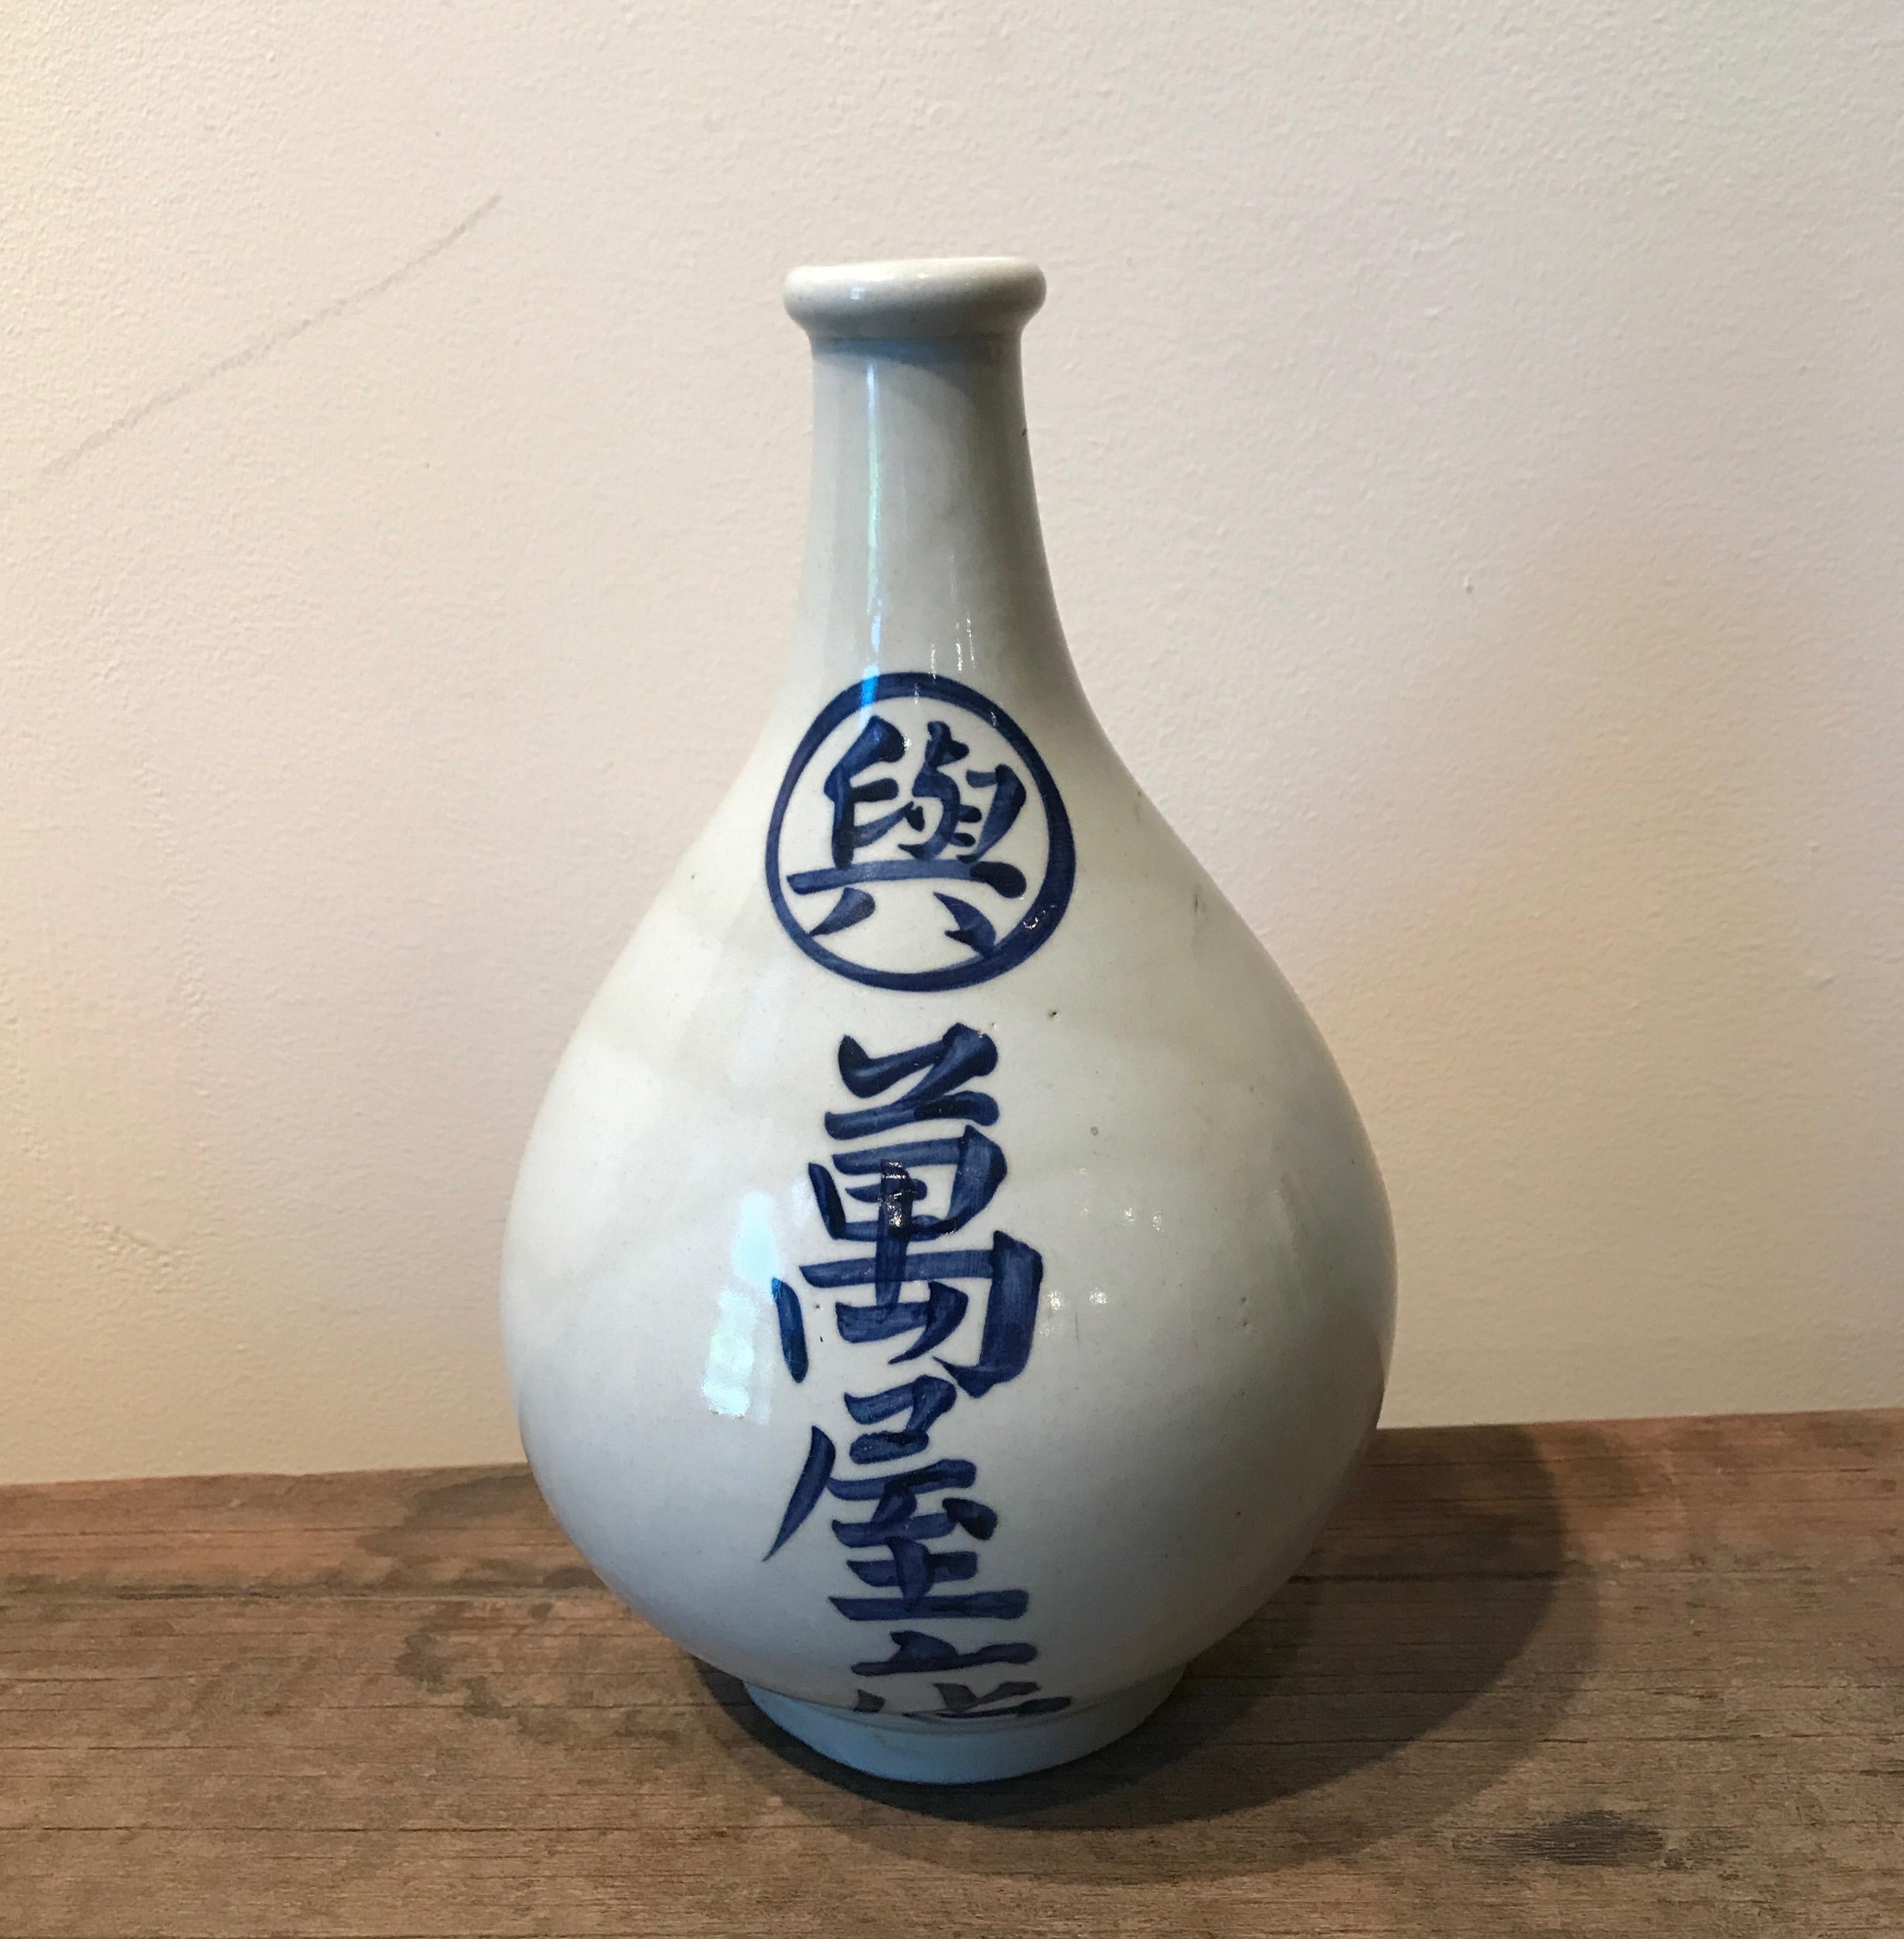 20th Century Vintage Japanese Sake Bottle with Hand Painted Calligraphy